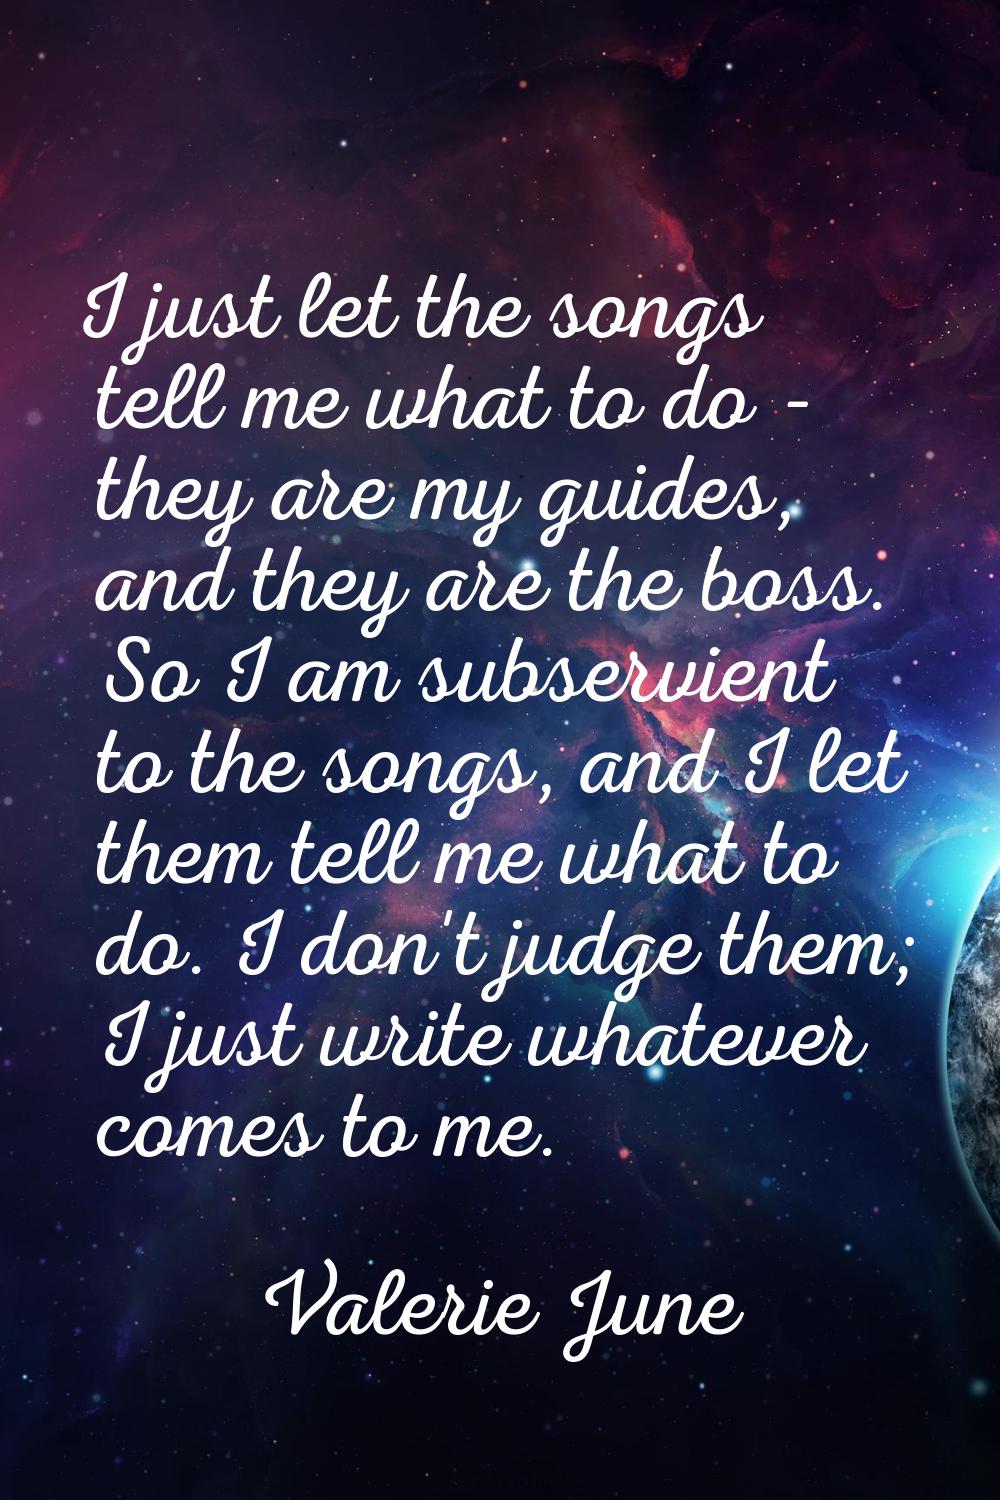 I just let the songs tell me what to do - they are my guides, and they are the boss. So I am subser